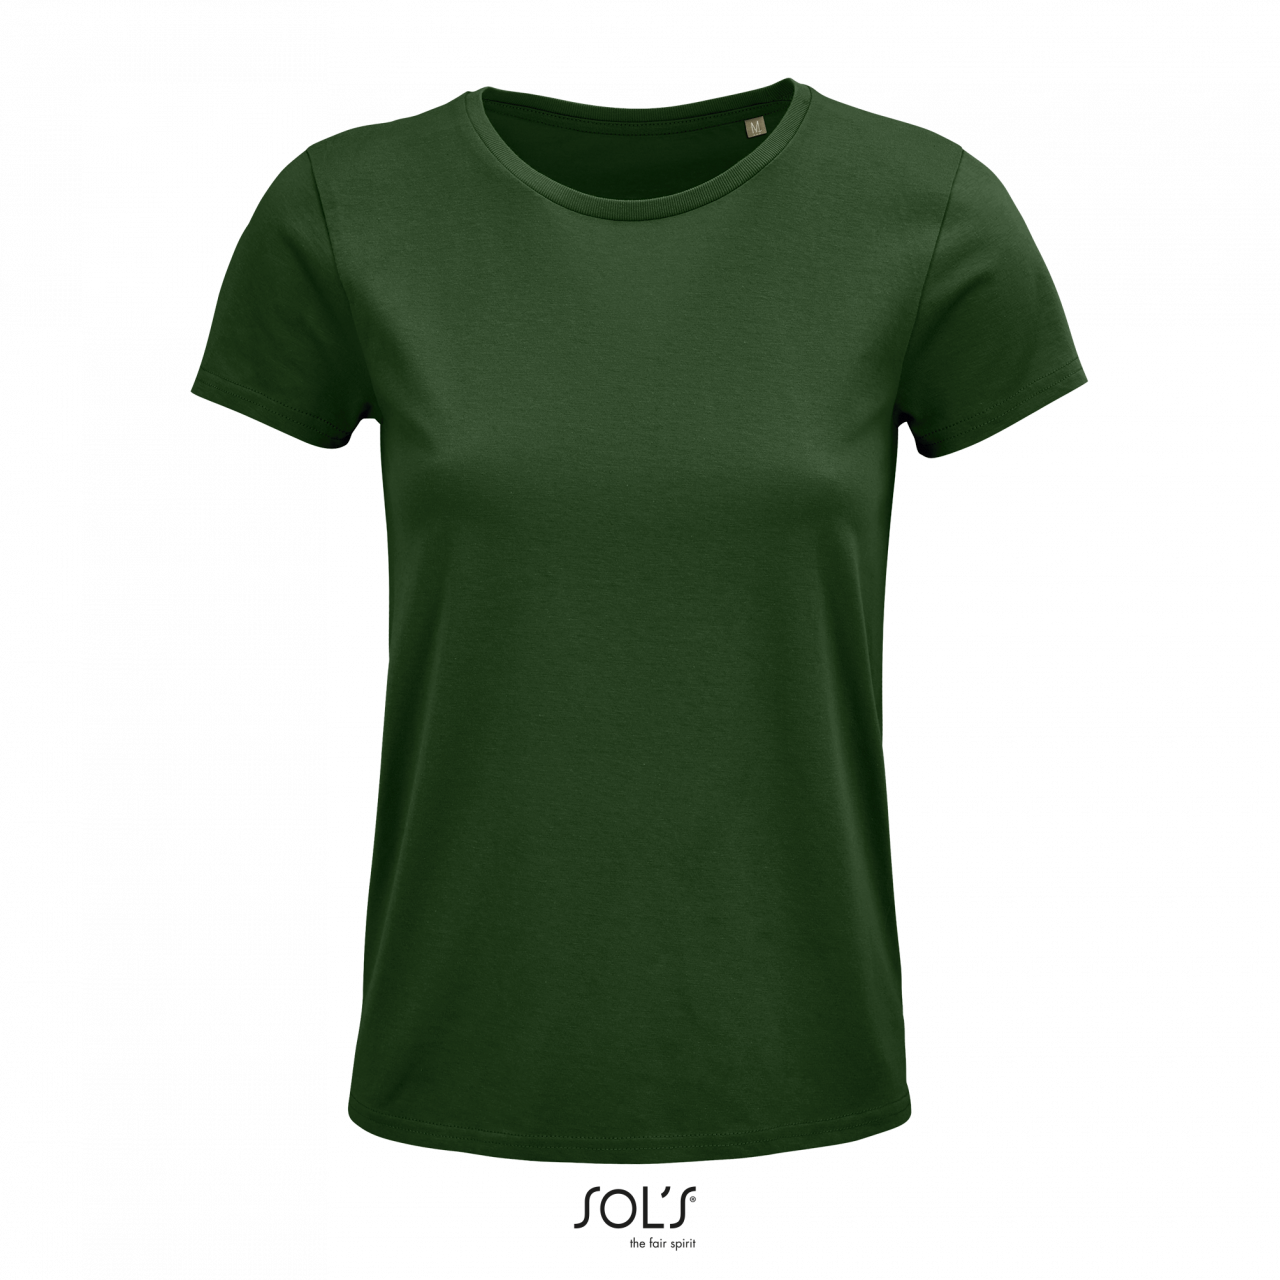 Sol's Crusader Women - Round-neck Fitted Jersey T-shirt - Sol's Crusader Women - Round-neck Fitted Jersey T-shirt - Forest Green